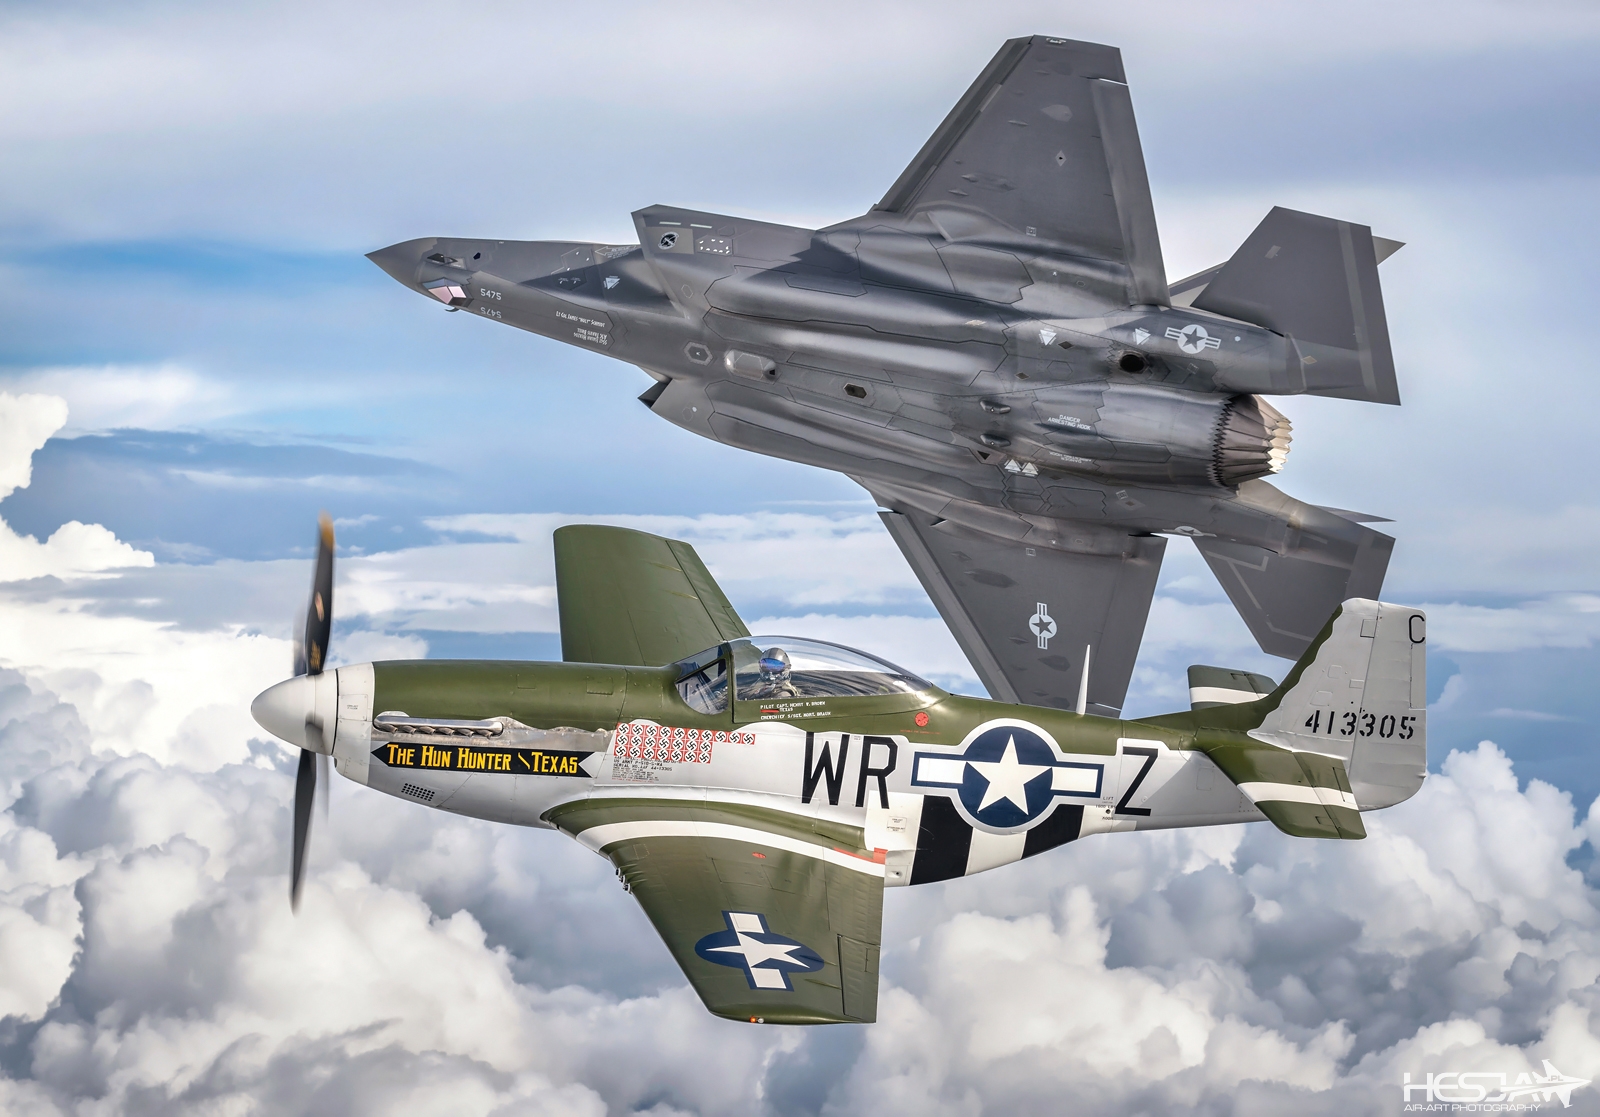 Marzec/March 10.09.2022. Air-to-Air shoot with Aviation PhotoCrew during Sanicole Airshow. U.S. Air Force Heritage Flight with F-35A Lightning II and North American P-51D Mustang. Nikon Z9. Nikkor Z 100-400 mm f/4.5-5.6 VR S (100mm 1/320 f/8 ISO 64).